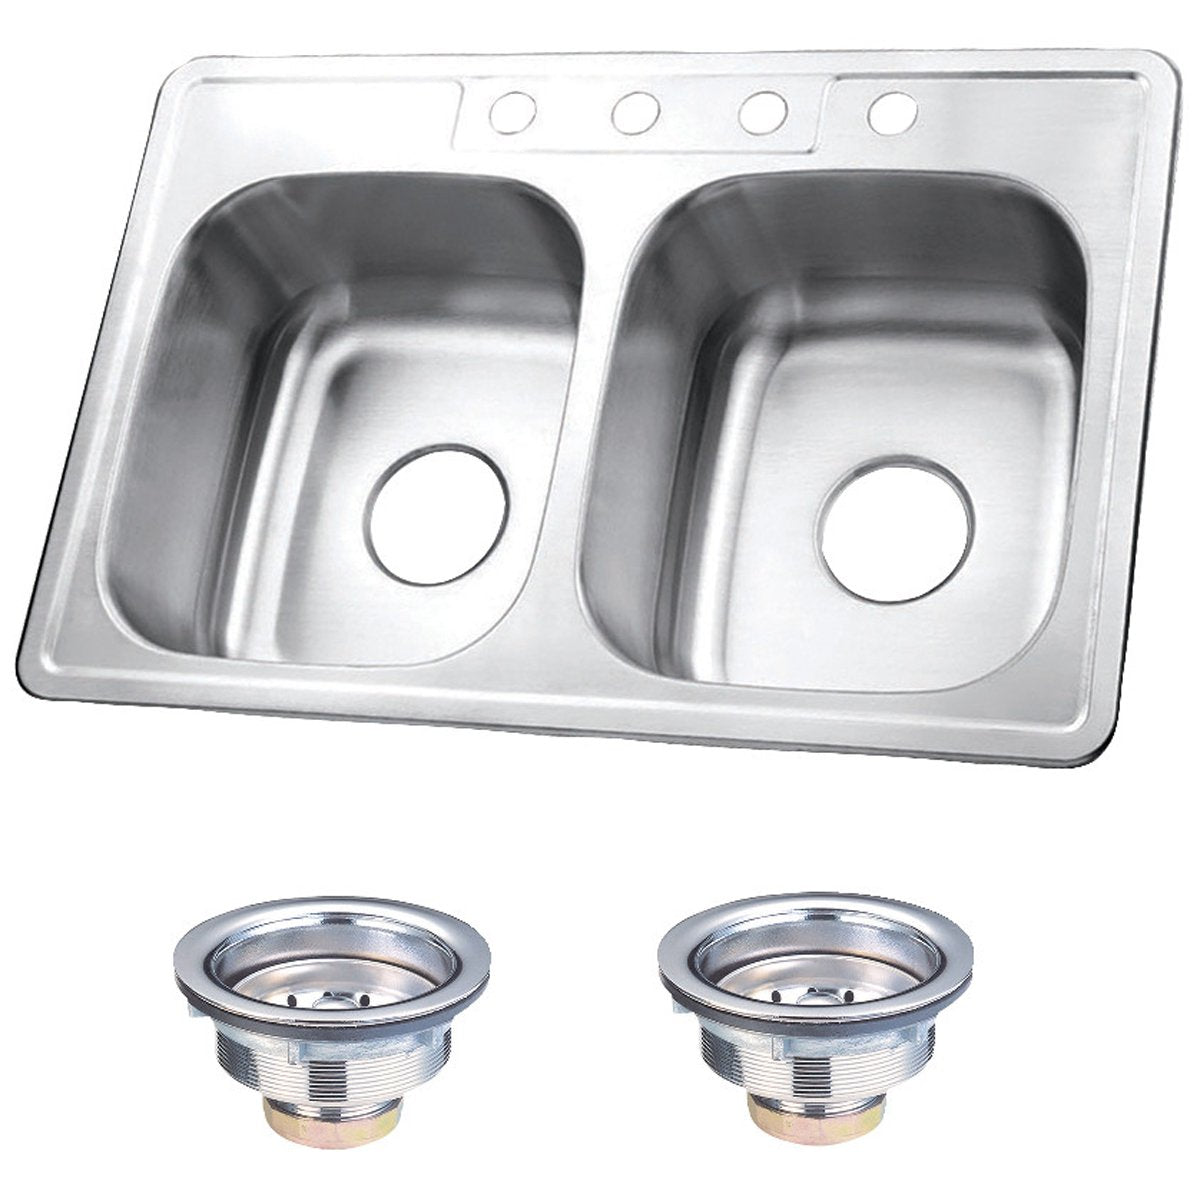 Kingston Brass Stainless Steel Self-Rimming Double Bowl Kitchen Sink